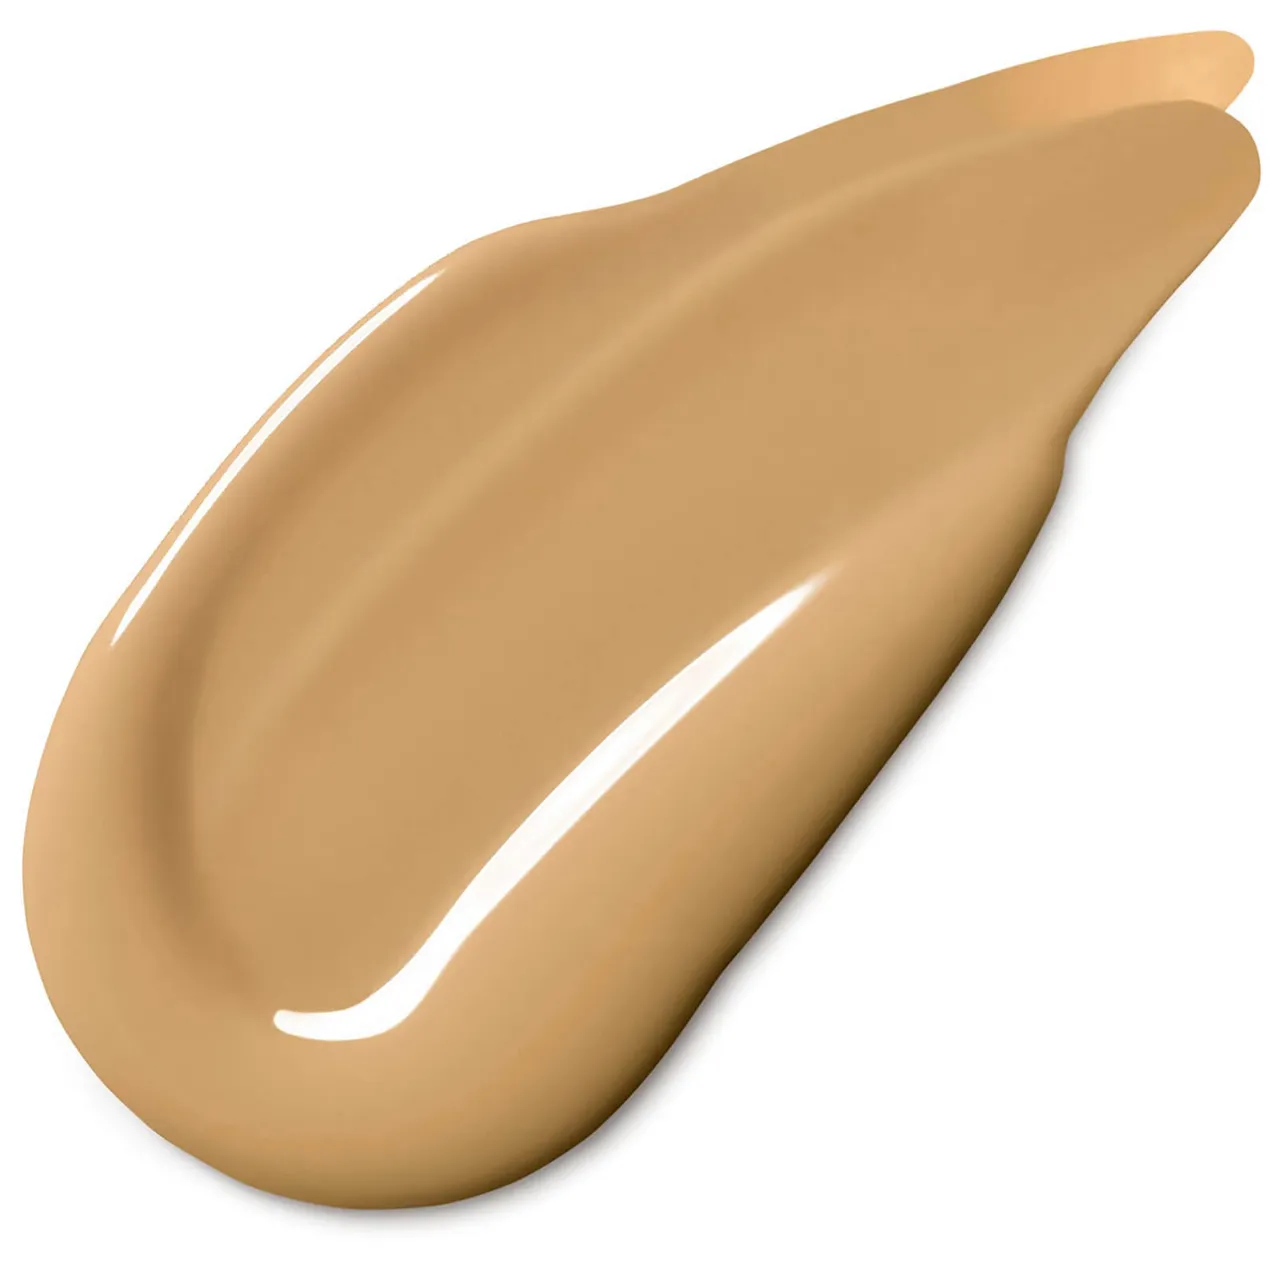 Clinique Even Better Clinical Serum Foundation SPF20 30ml (Various Shades) - Sand